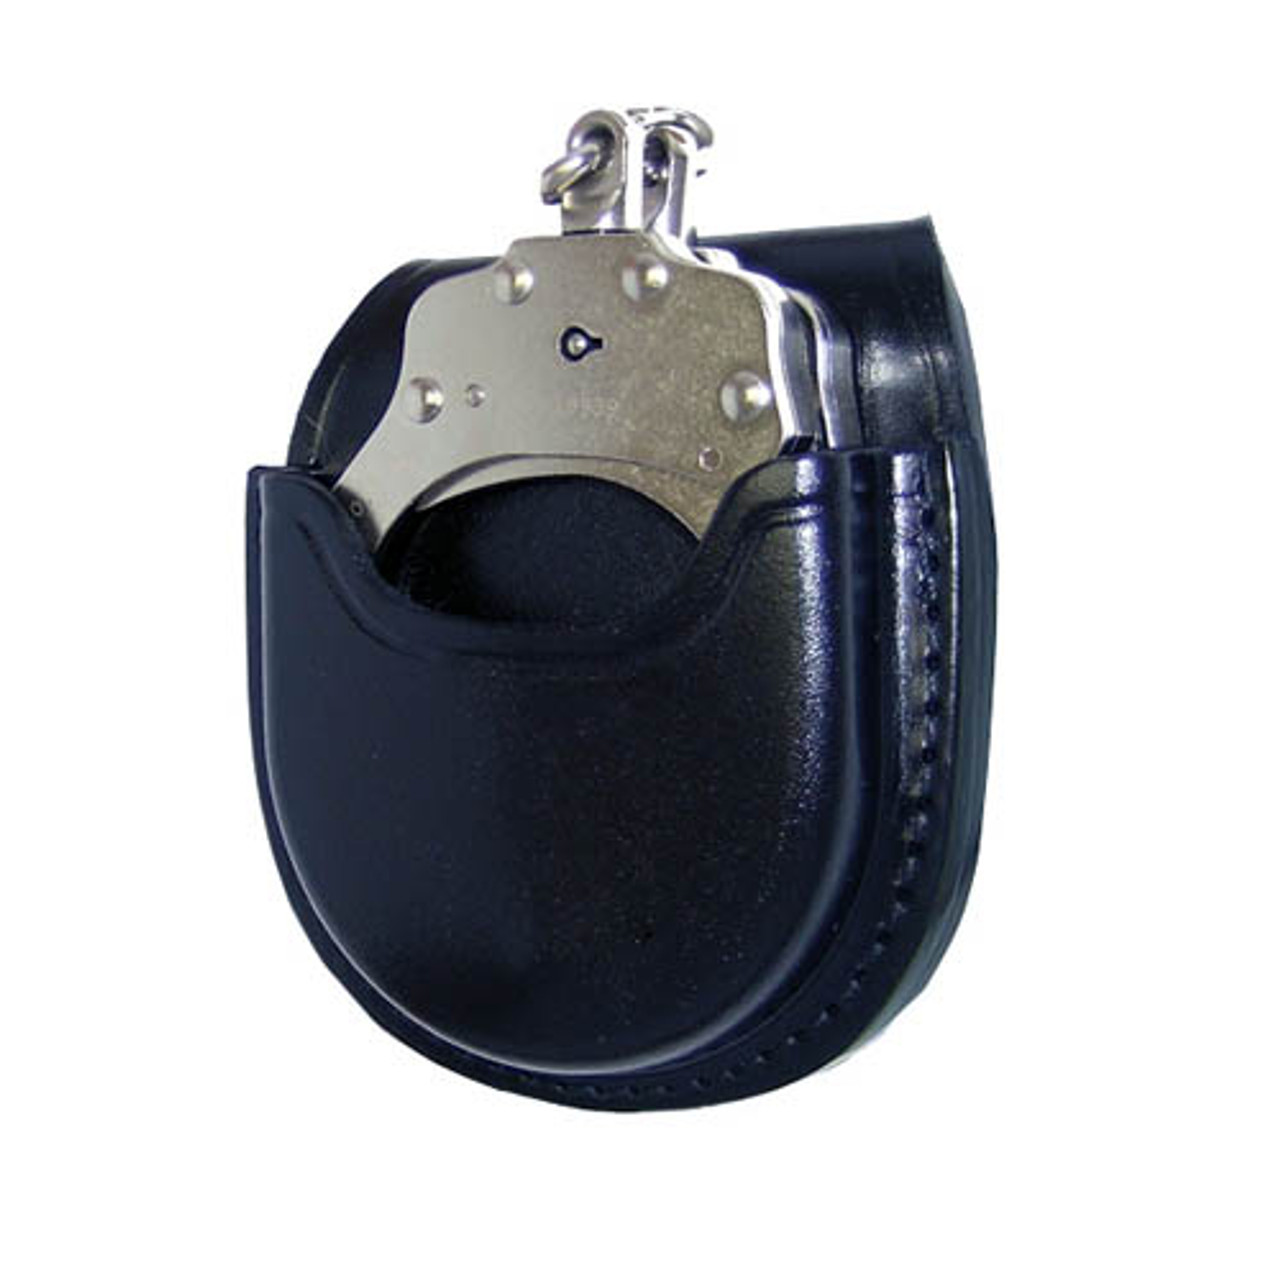 502 Open Top Handcuff Case On Duty Aker Leather, 47% OFF